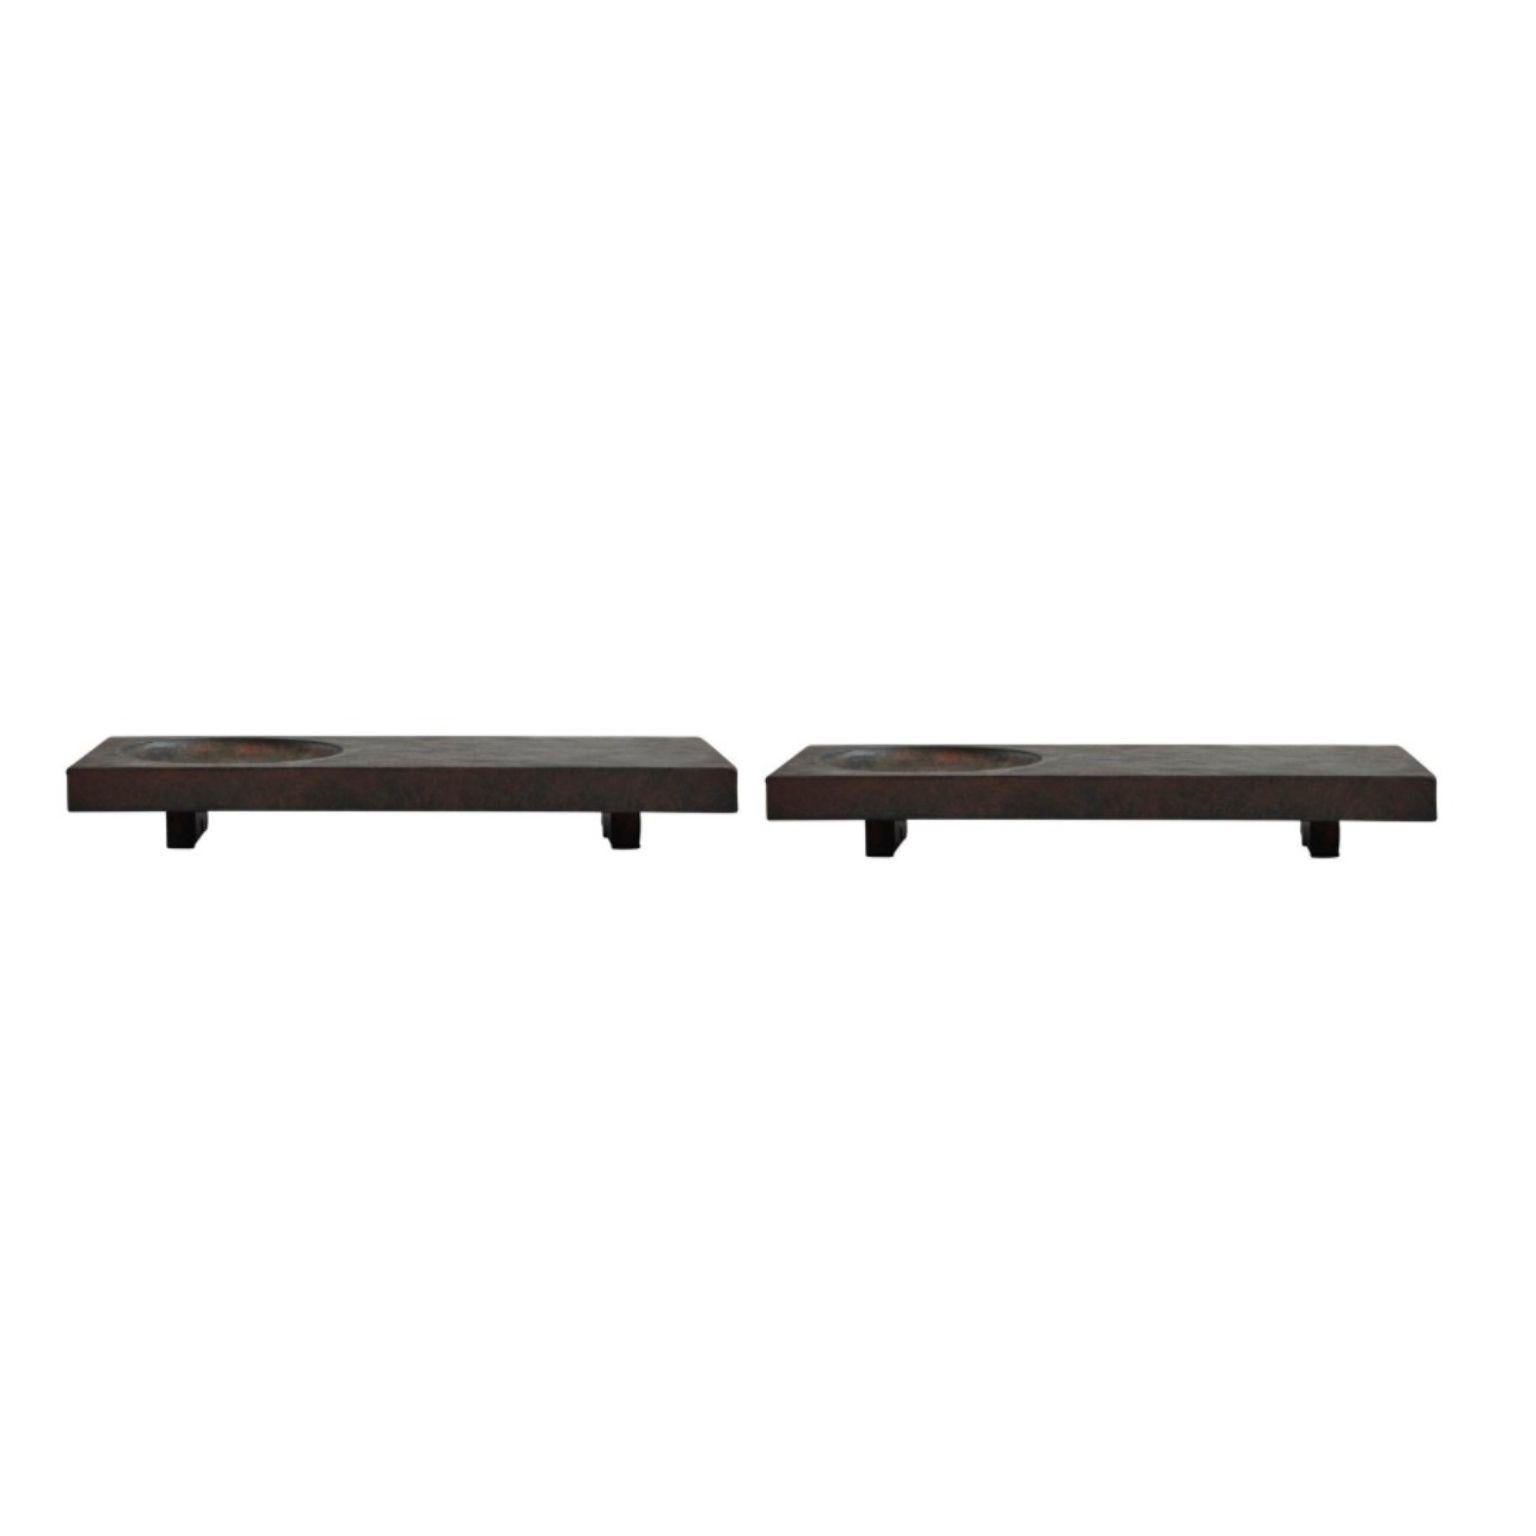 Set of 2 Oka Trays by 101 Copenhagen
Designed by Kristian Sofus Hansen & Tommy Hyldahl
Dimensions: L 45 / W 20 / H 6 cm
Materials: fiber concrete

Oka tray is inspired by traditional Japanese serving trays, often produced in wood or bamboo